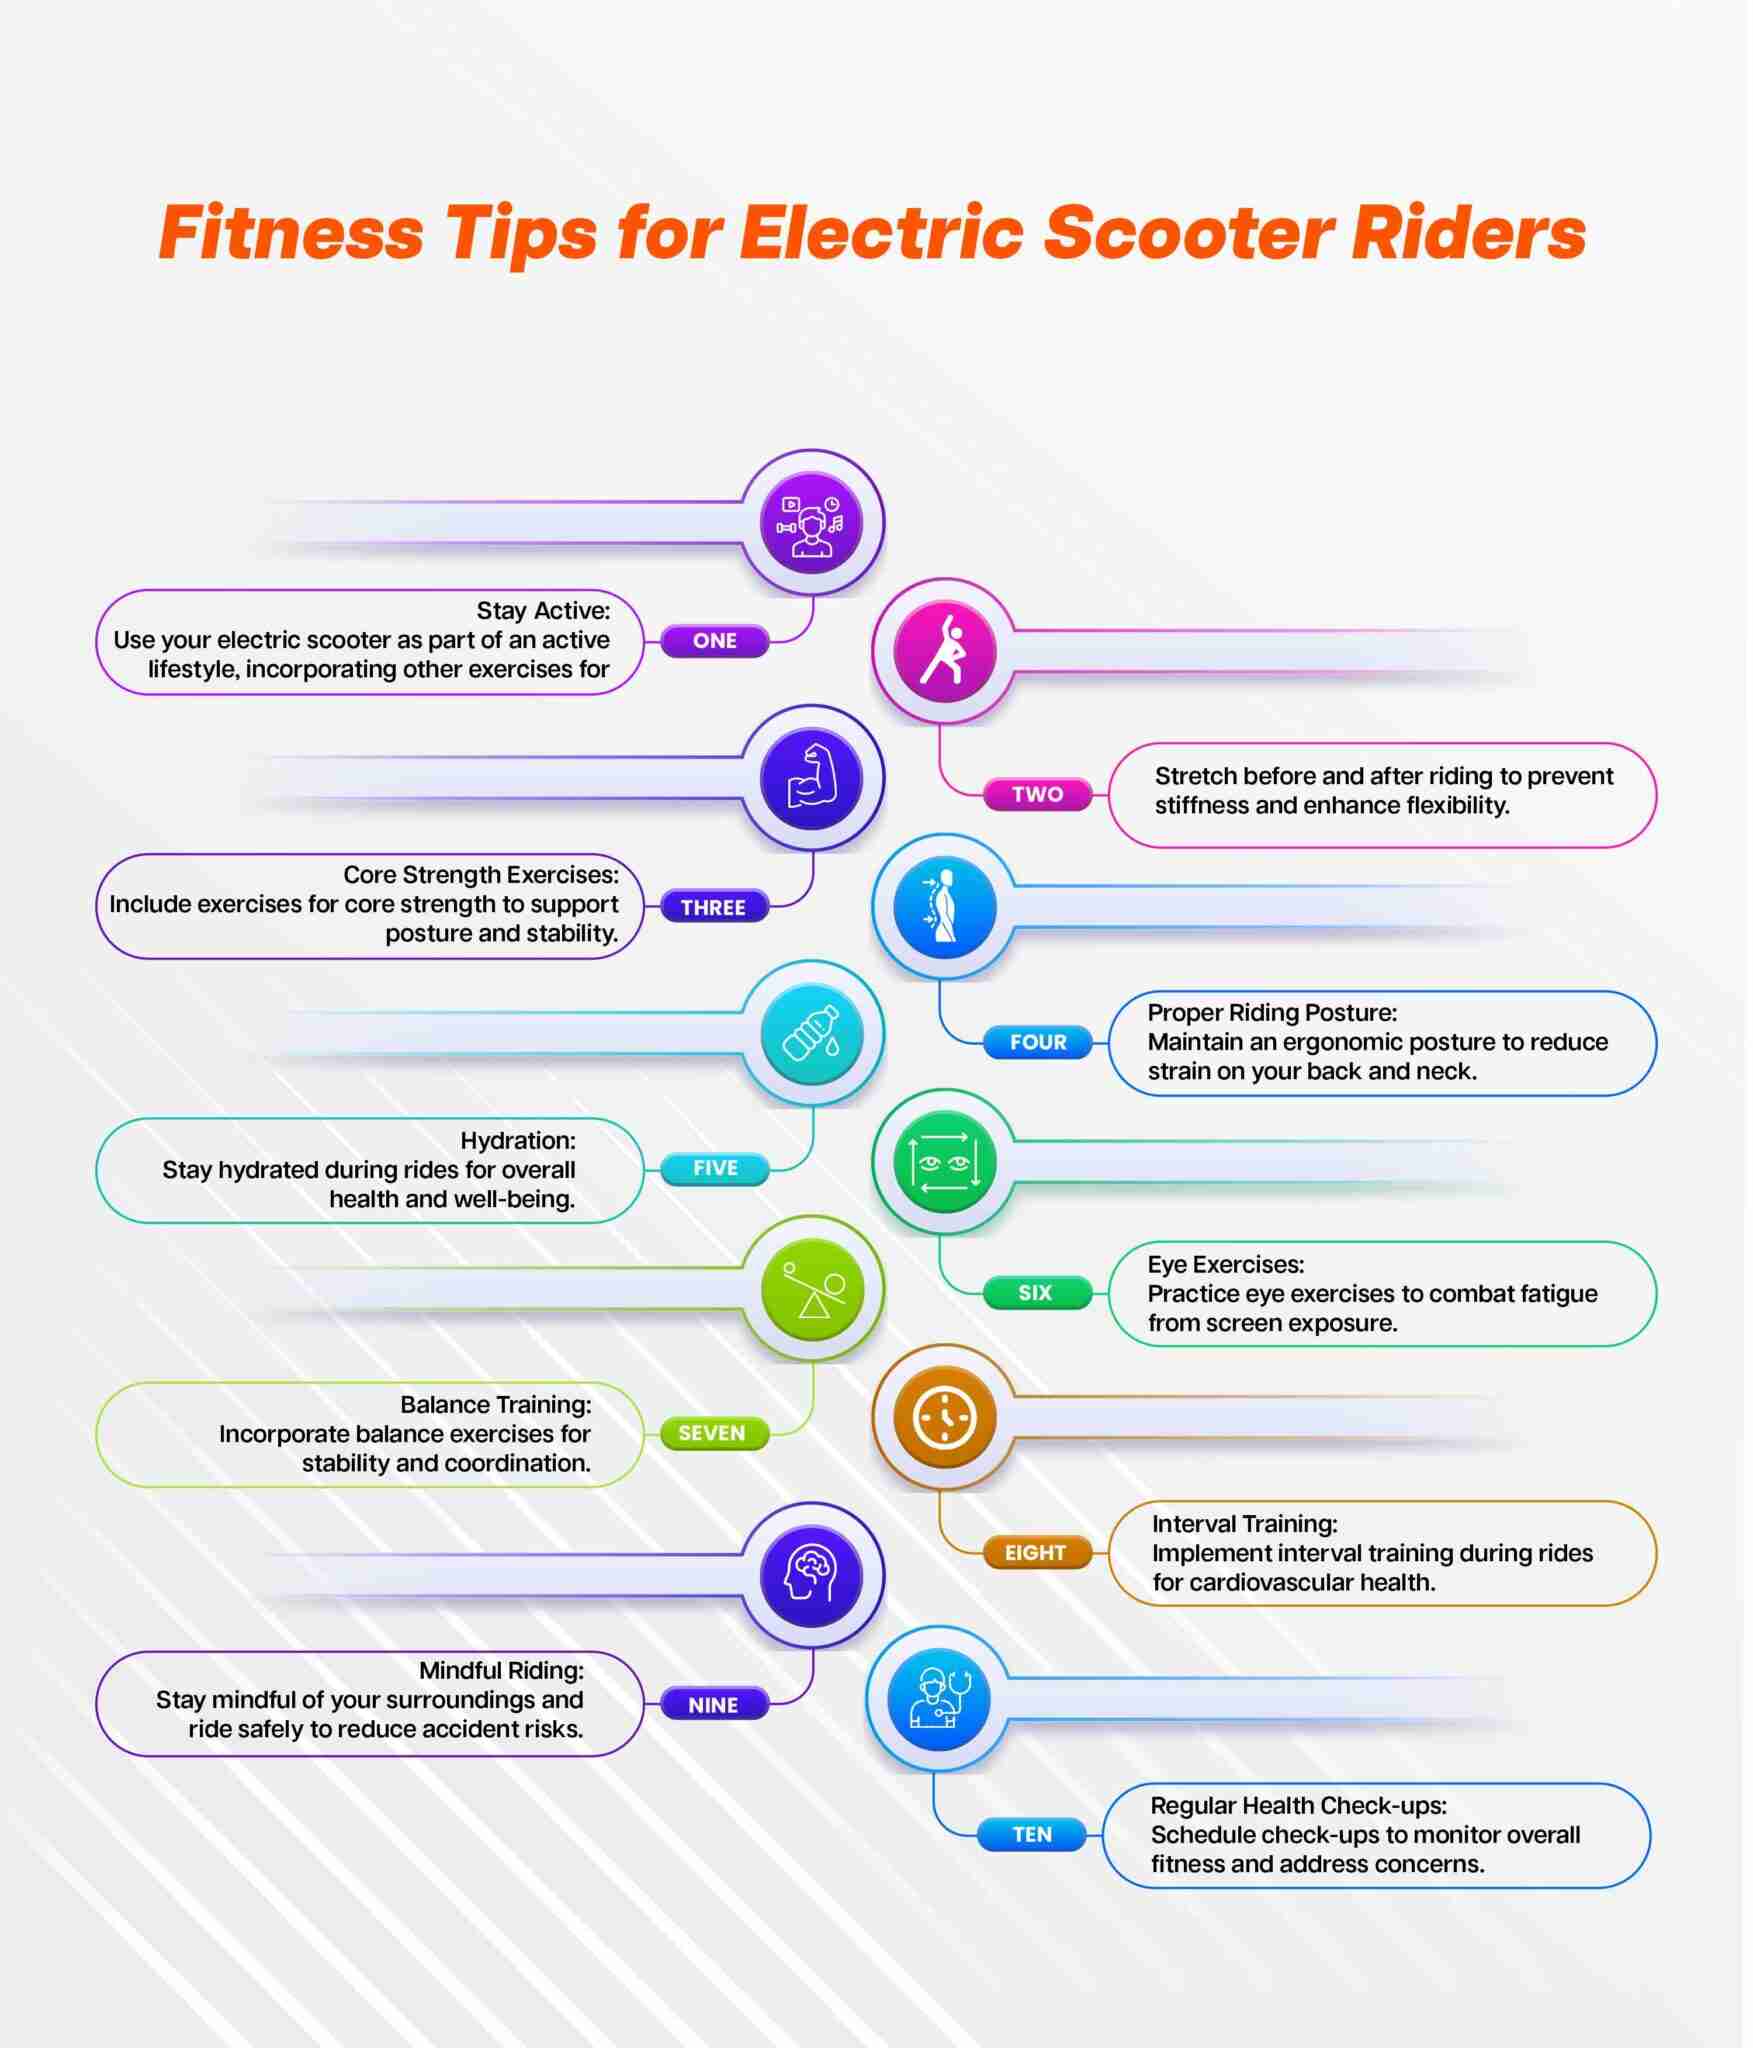 Fitness Tips for Electric Scooter Riders